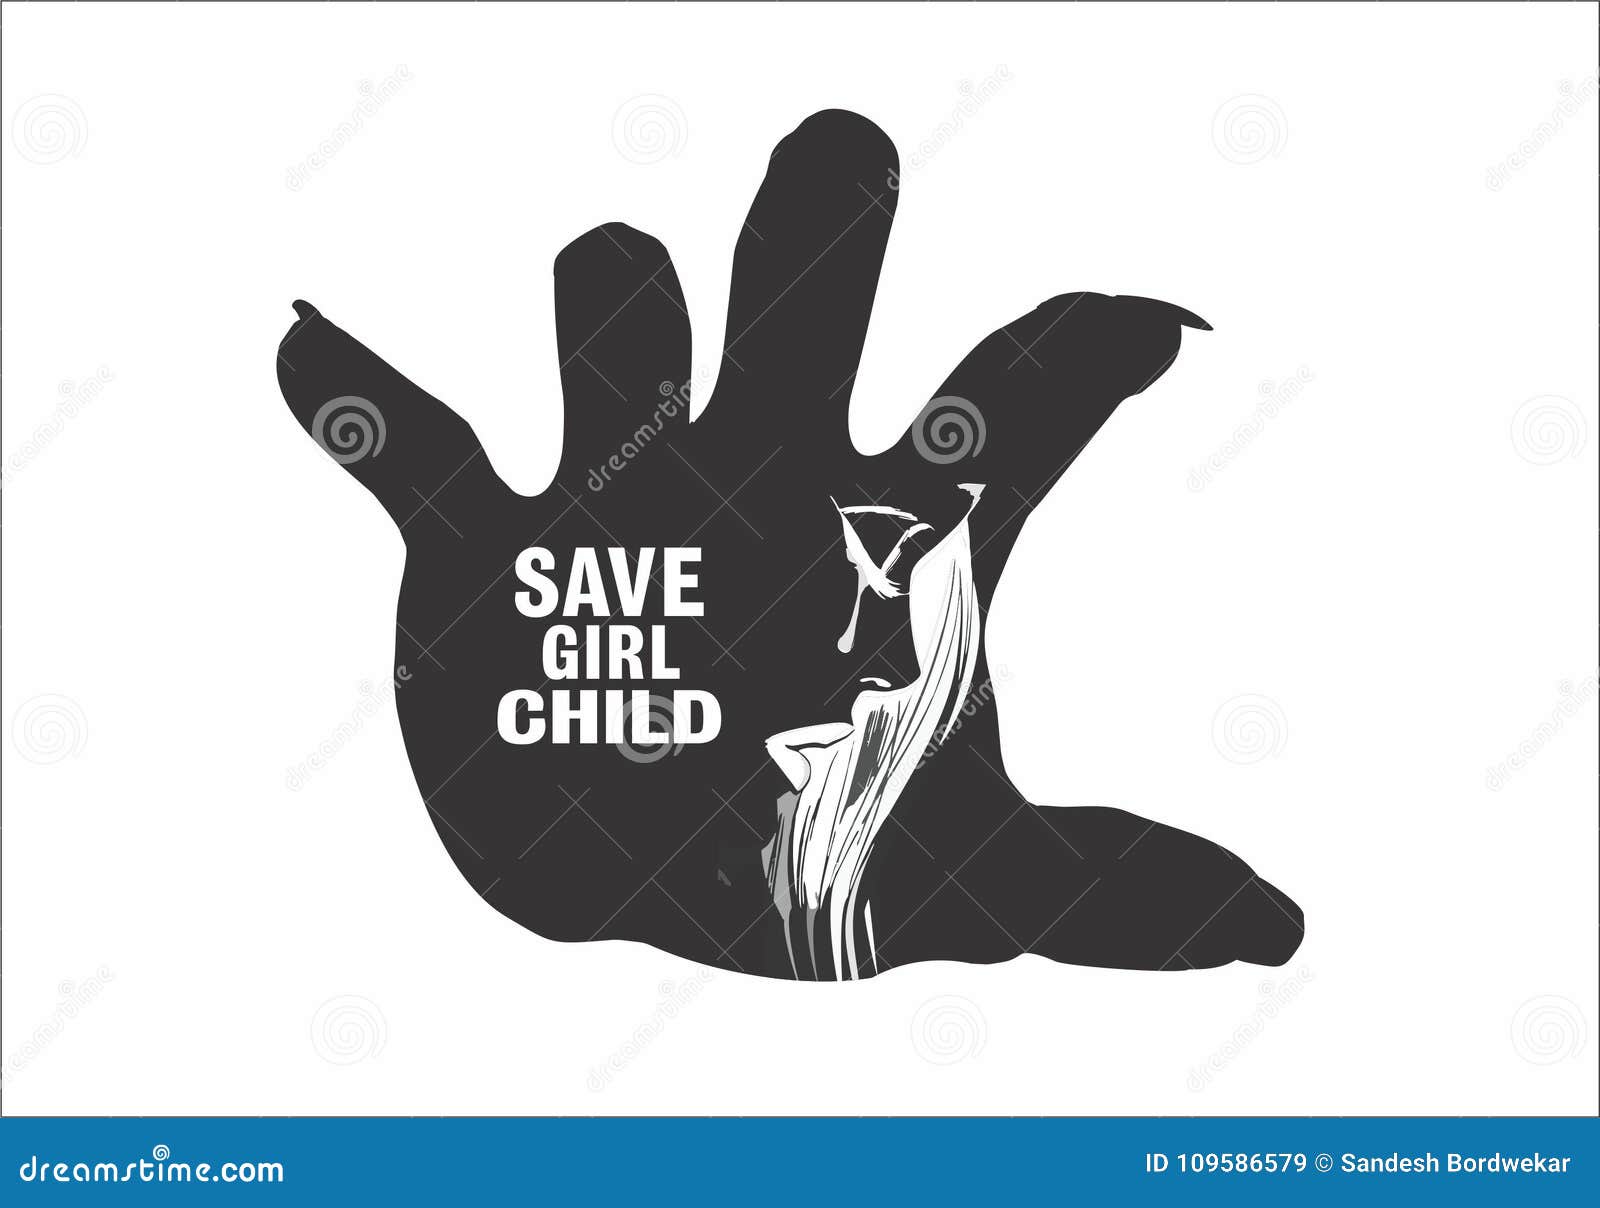 Save the child concept stock illustration. Illustration of concept ...